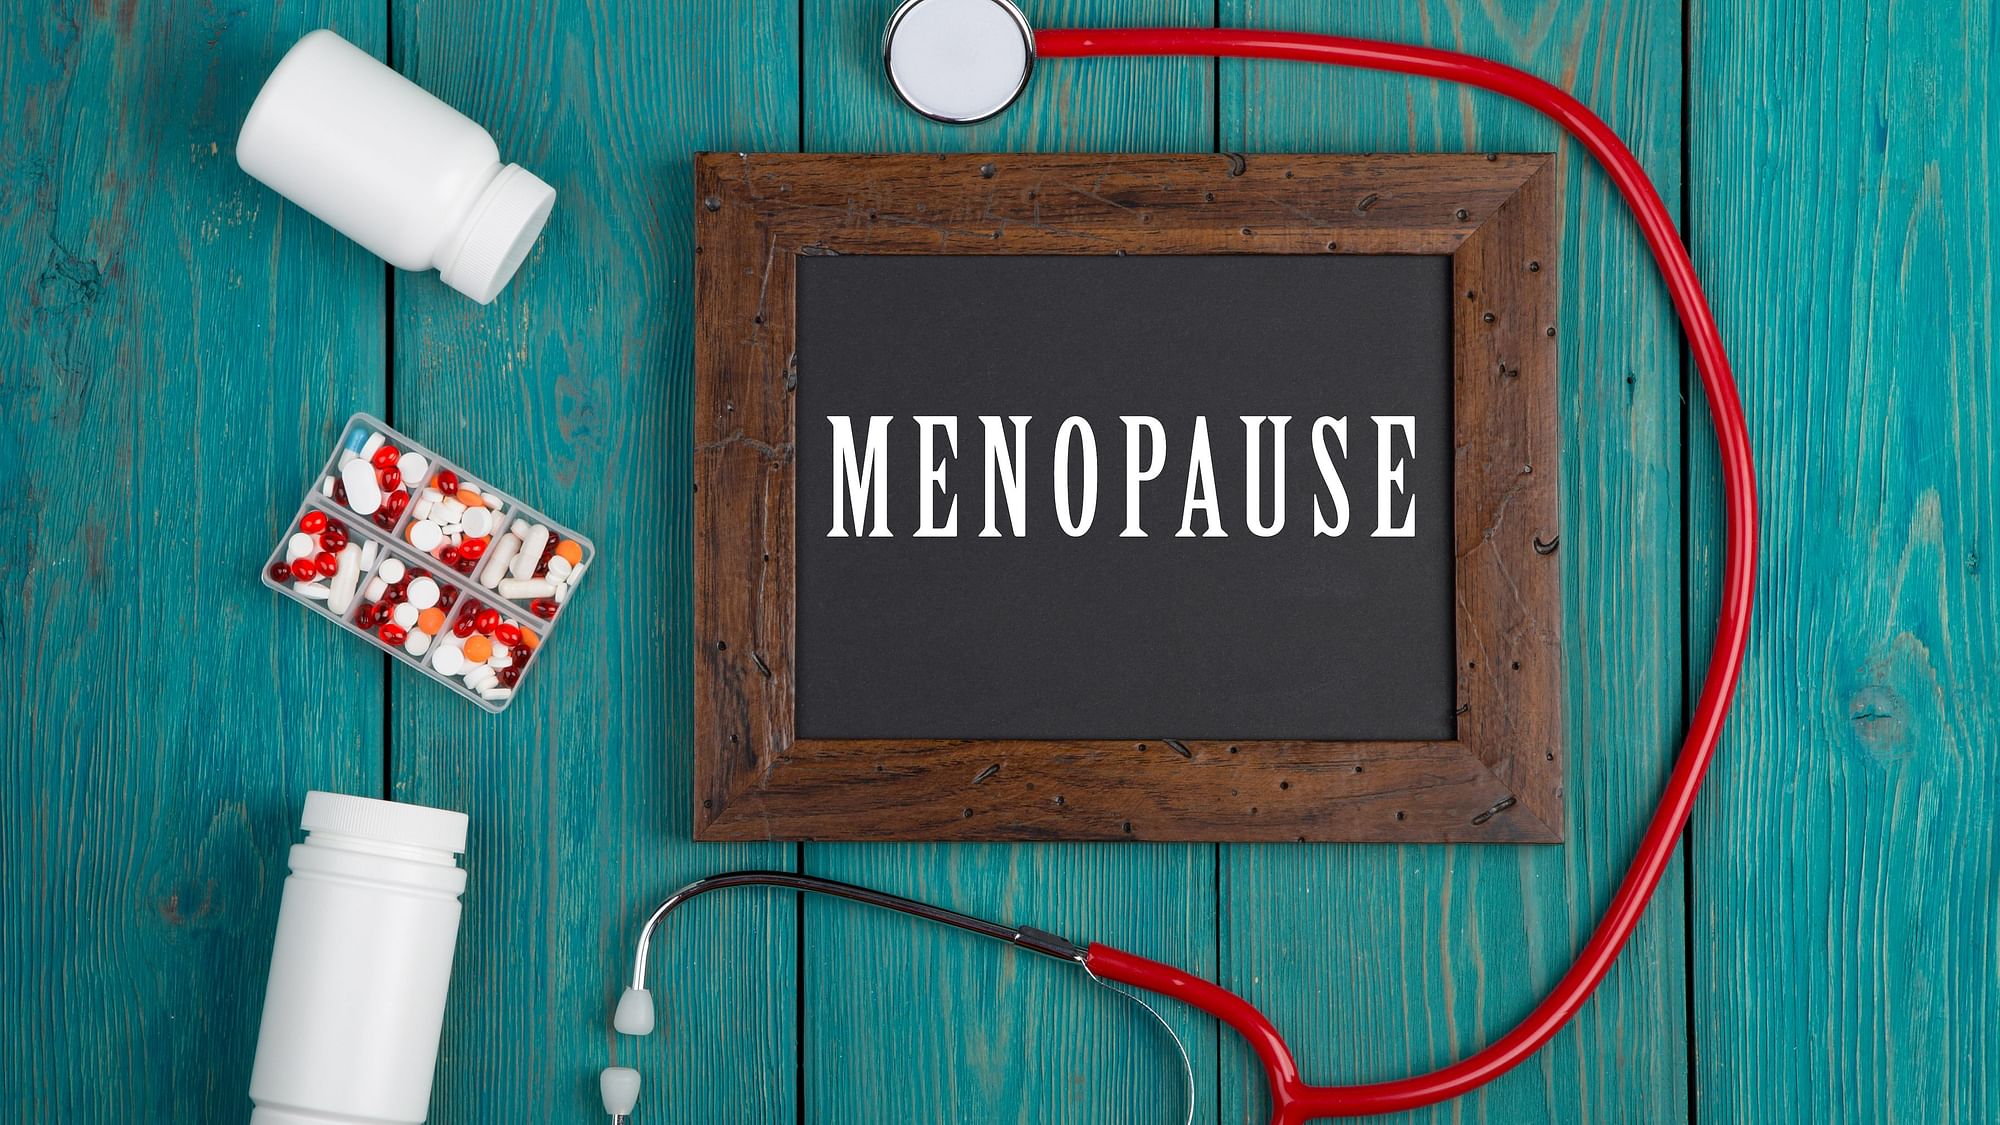 There may be a way to modify your diet to help alleviate some menopausal symptoms.&nbsp;